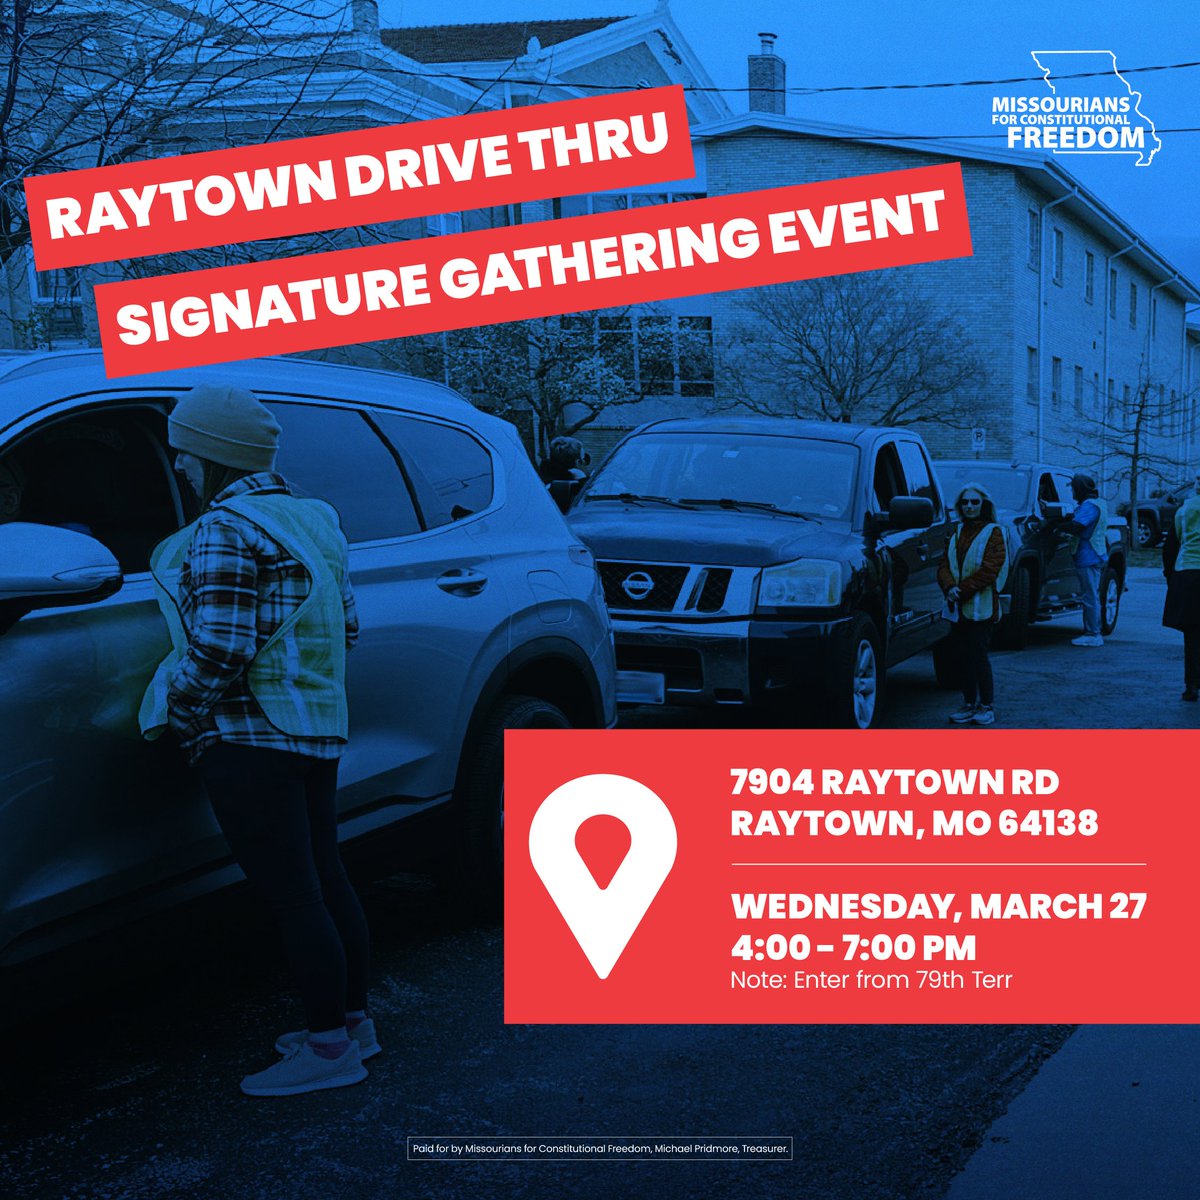 Another opportunity to sign to end the abortion ban in the KC area this week! Stop by the Raytown drive thru signature gathering event this Wednesday, March 27, from 4:00 PM to 7:00 PM. Learn more: mobilize.us/mfcf/event/614…